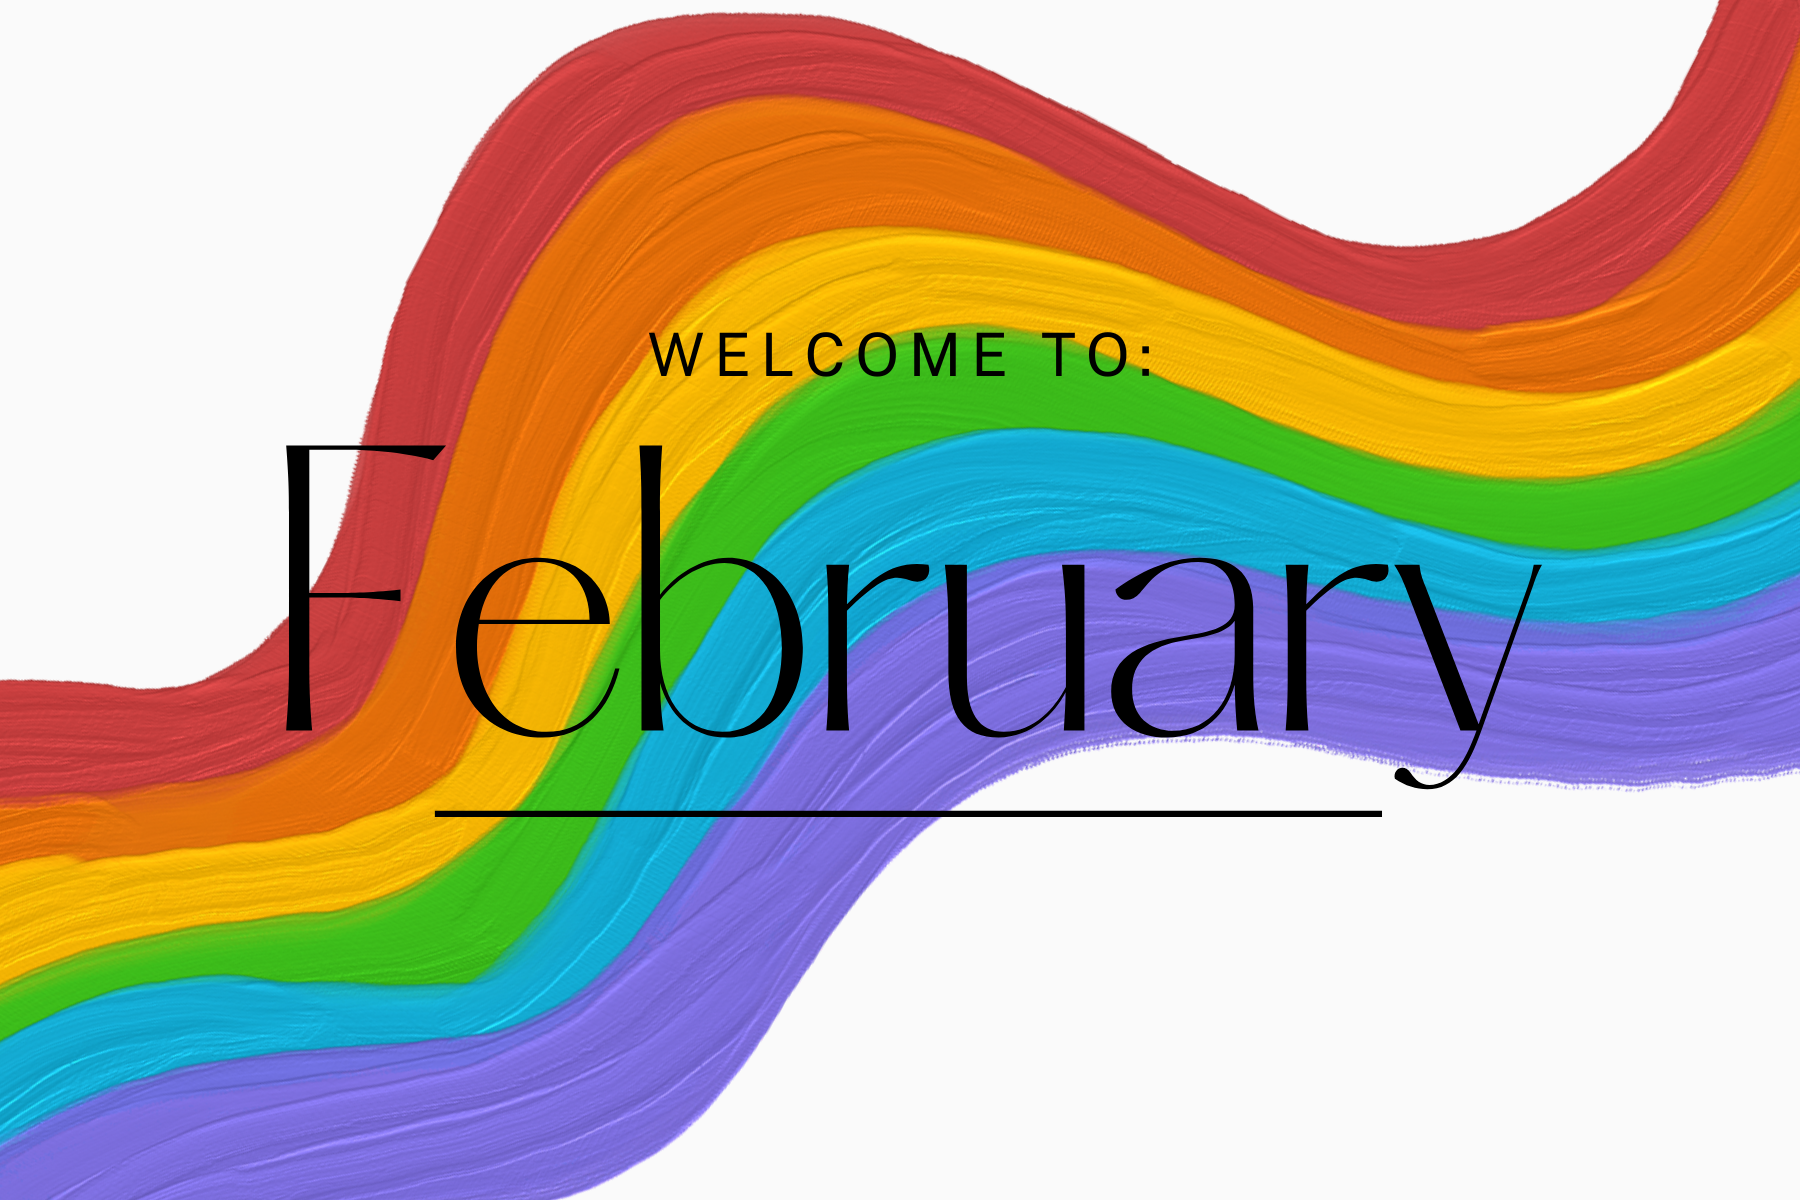 Welcome to February